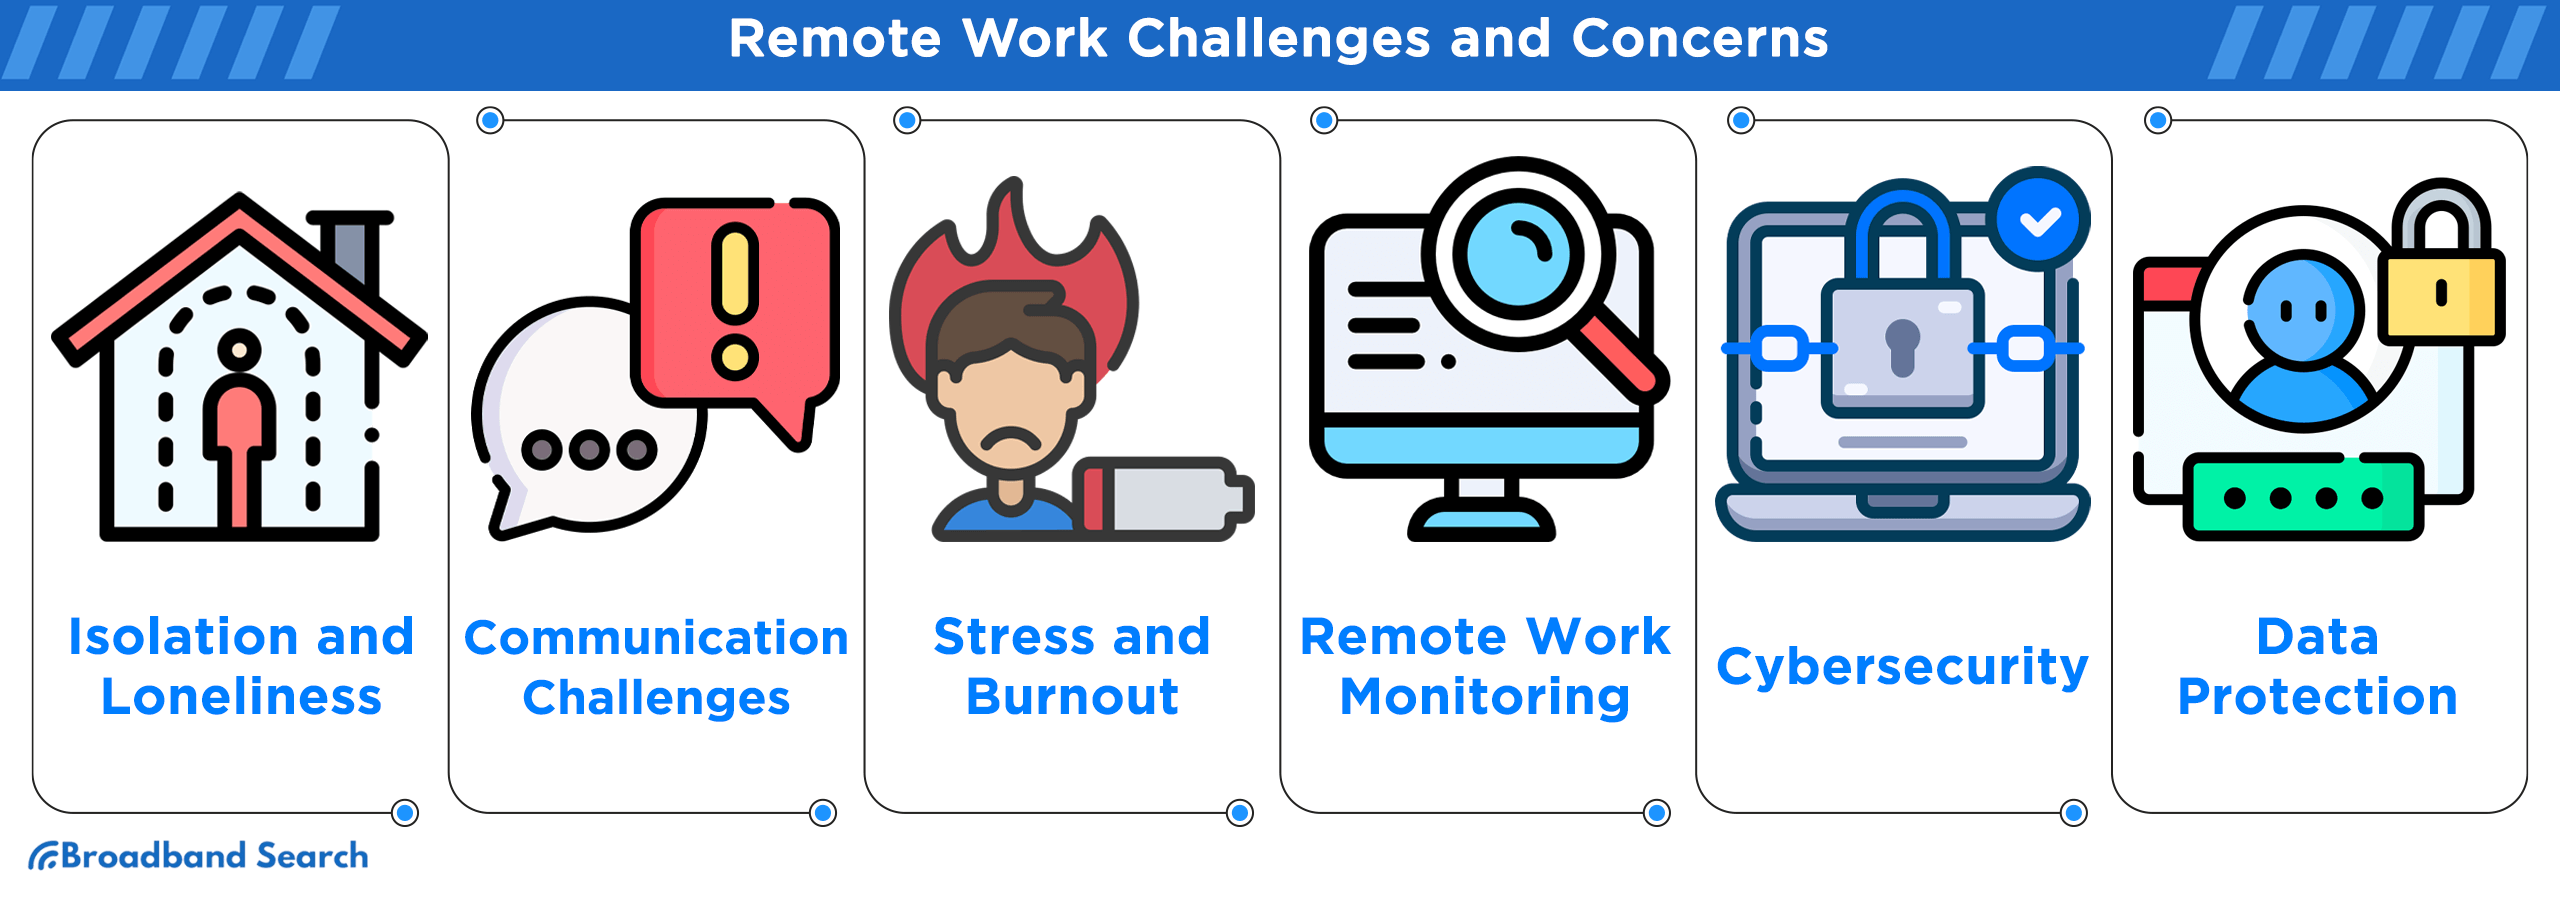 Six remote work challenges and concerns